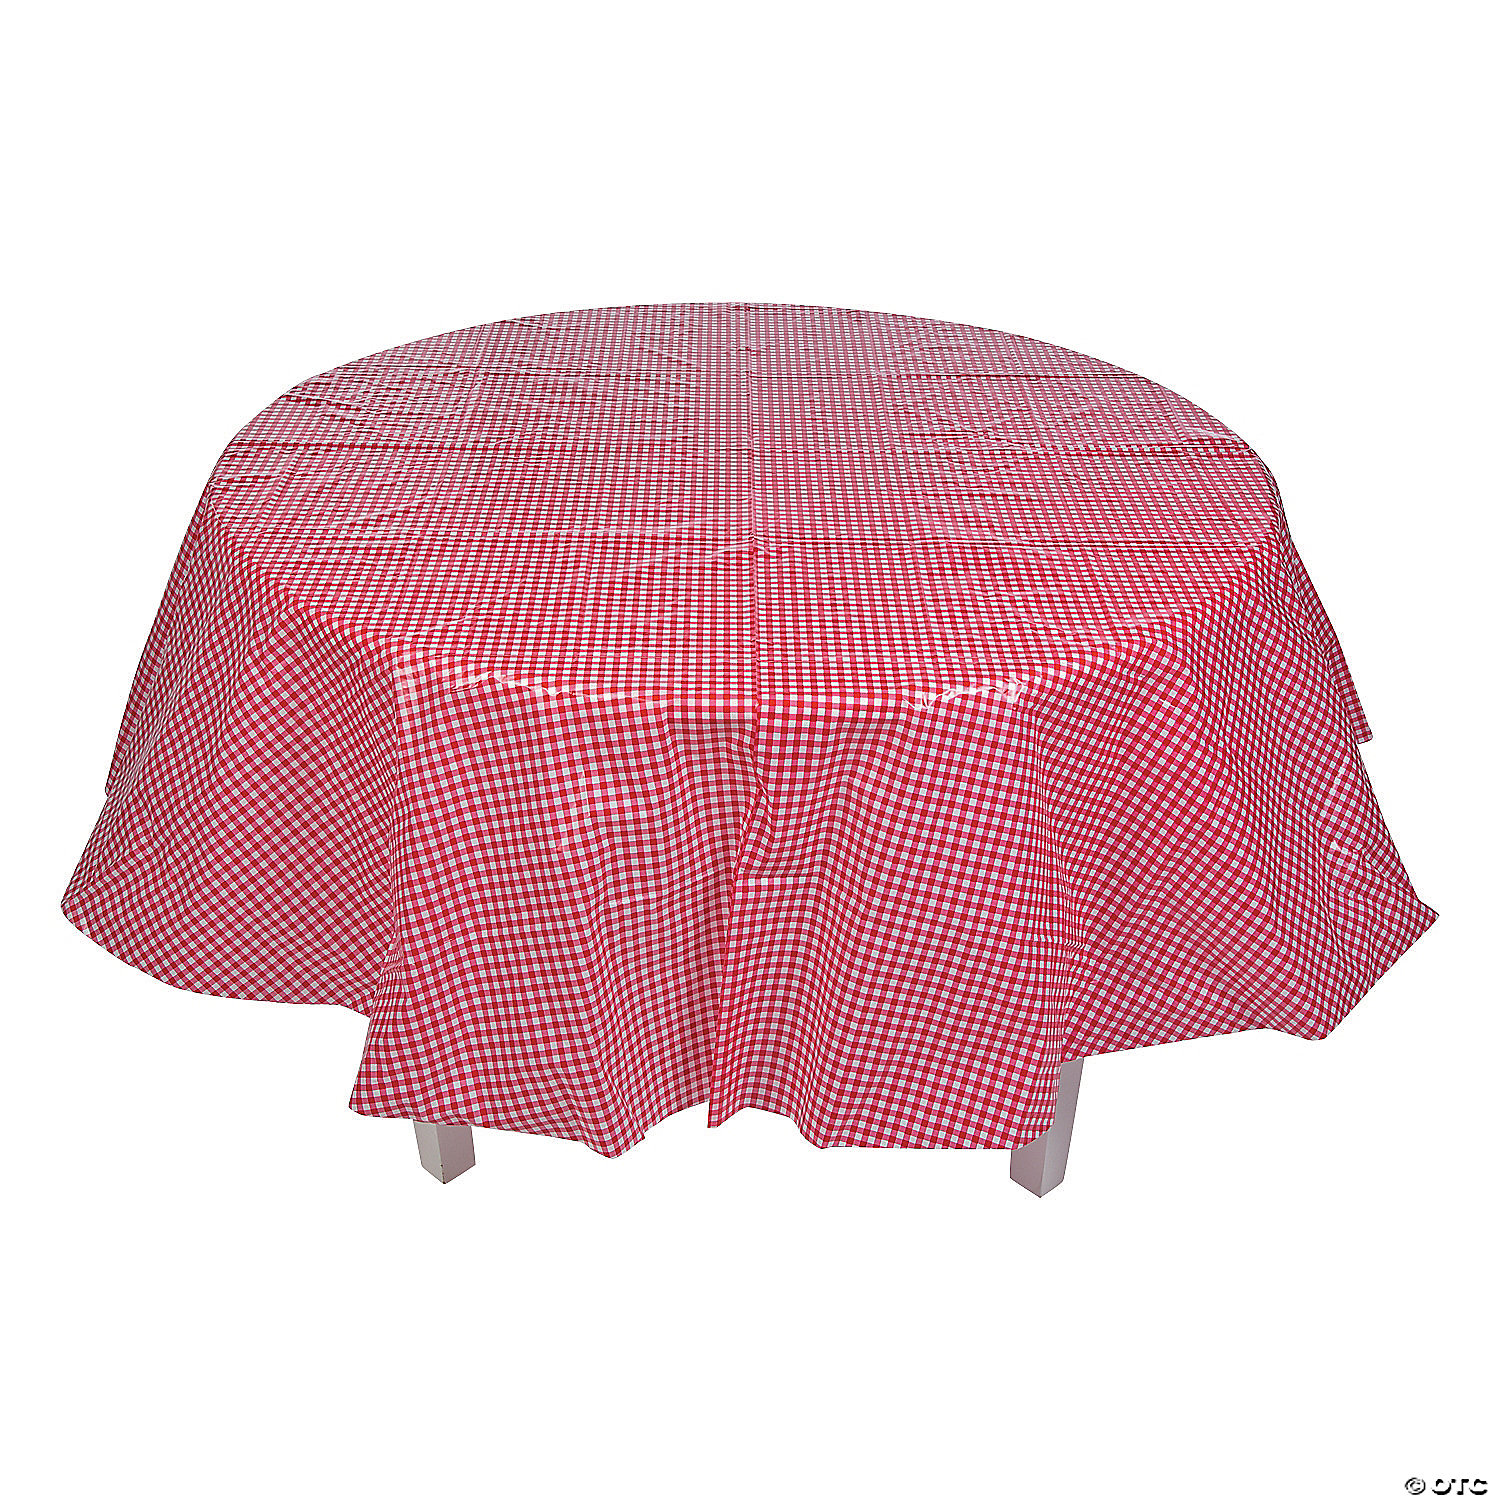 2 pieces Red and White Gingham table cover tablecloth plastic 84" round 